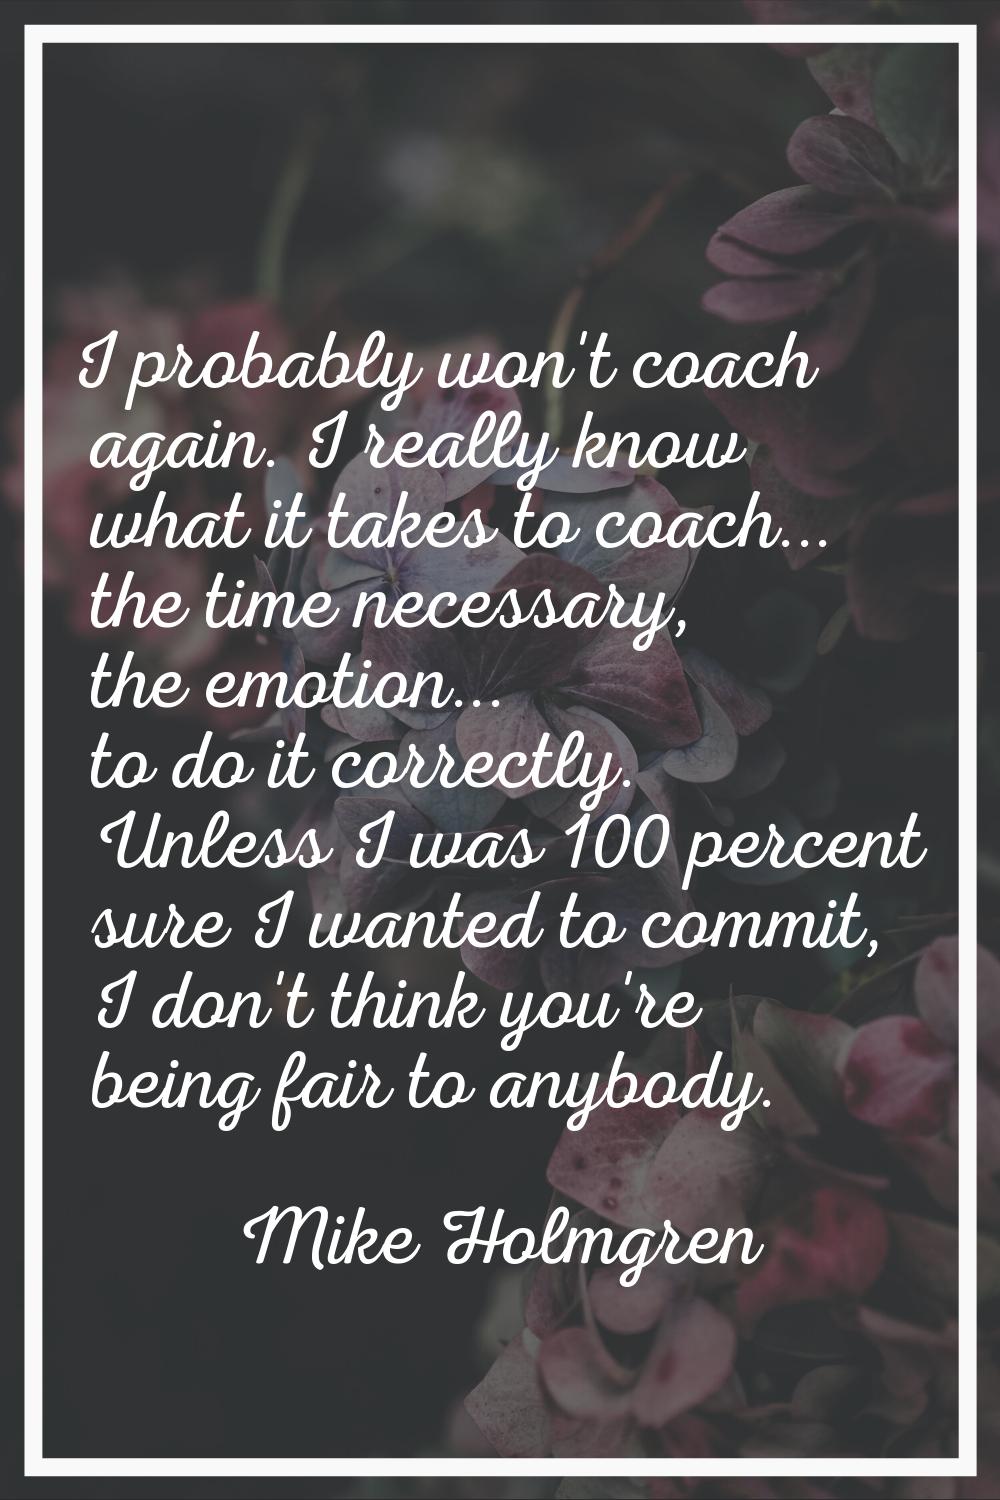 I probably won't coach again. I really know what it takes to coach... the time necessary, the emoti